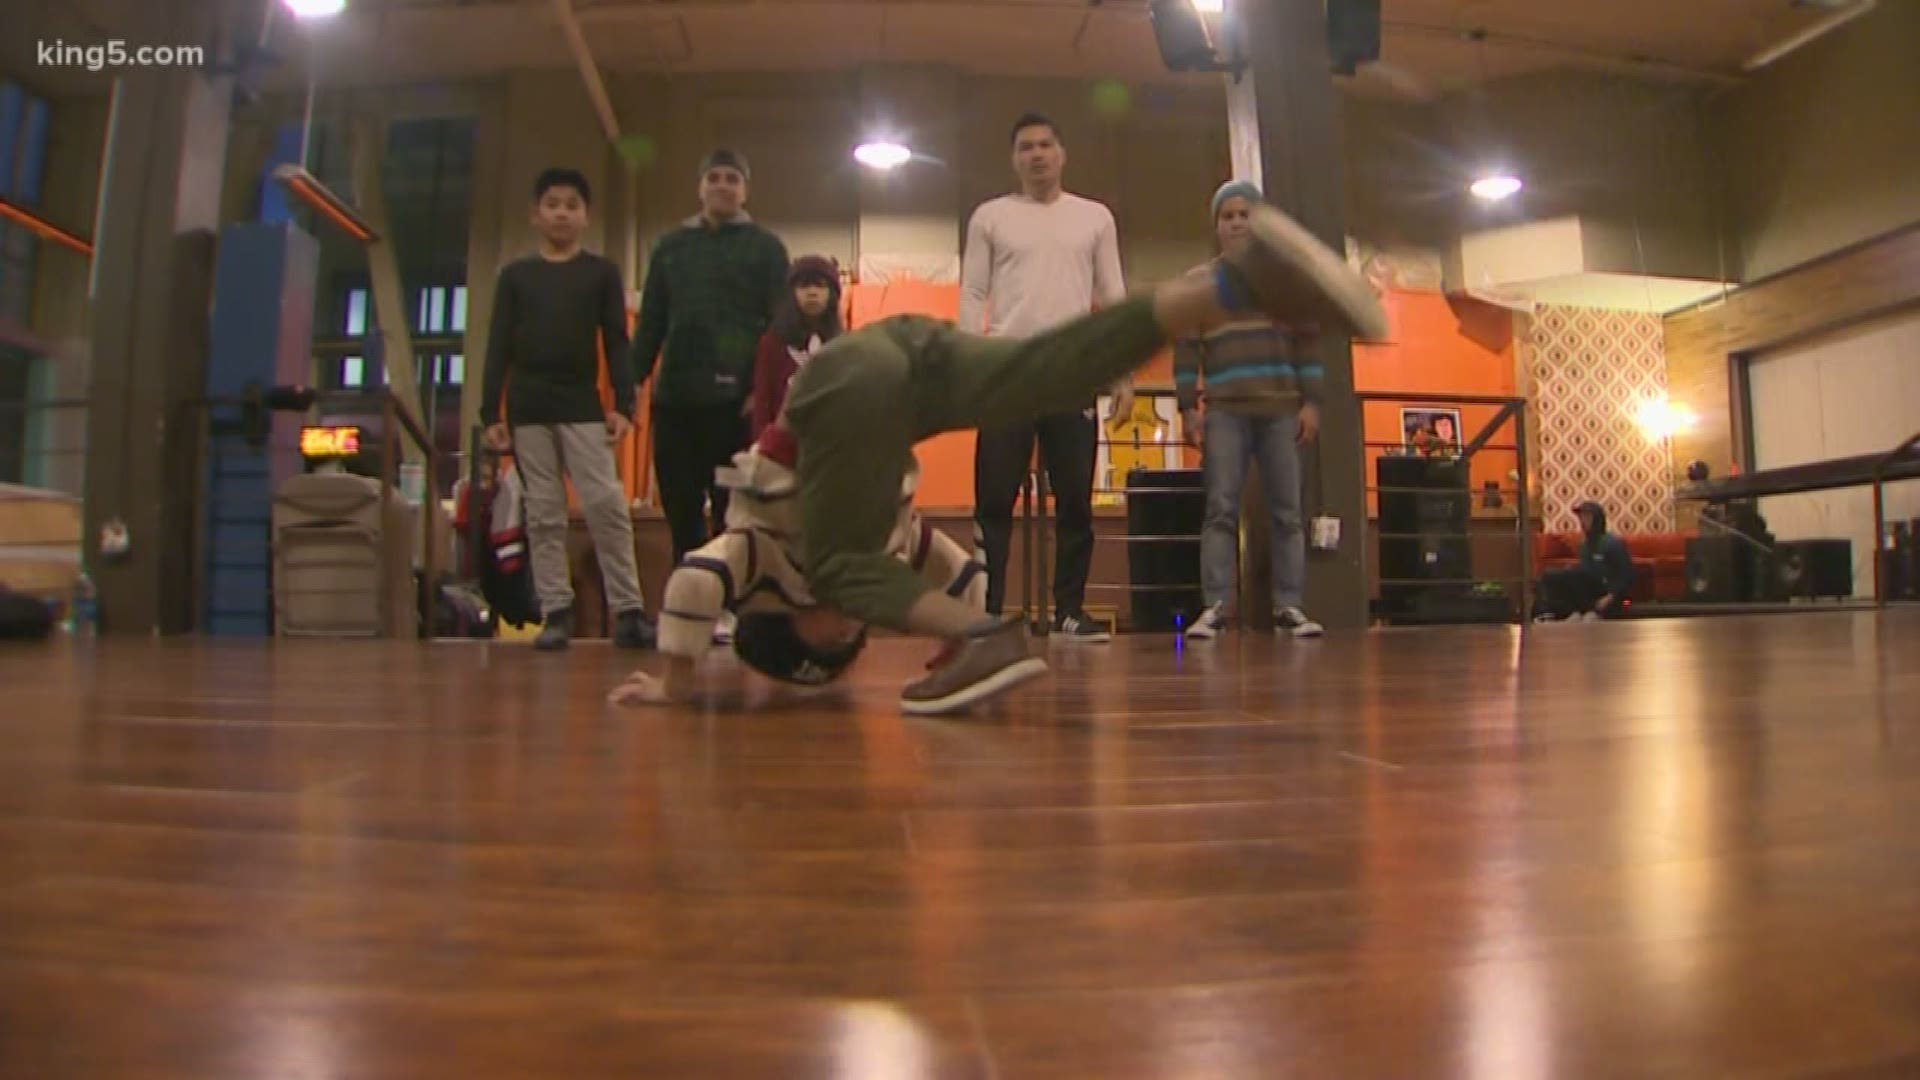 Paris organizing committee wants to add breakdancing to 2024 Olympic games.